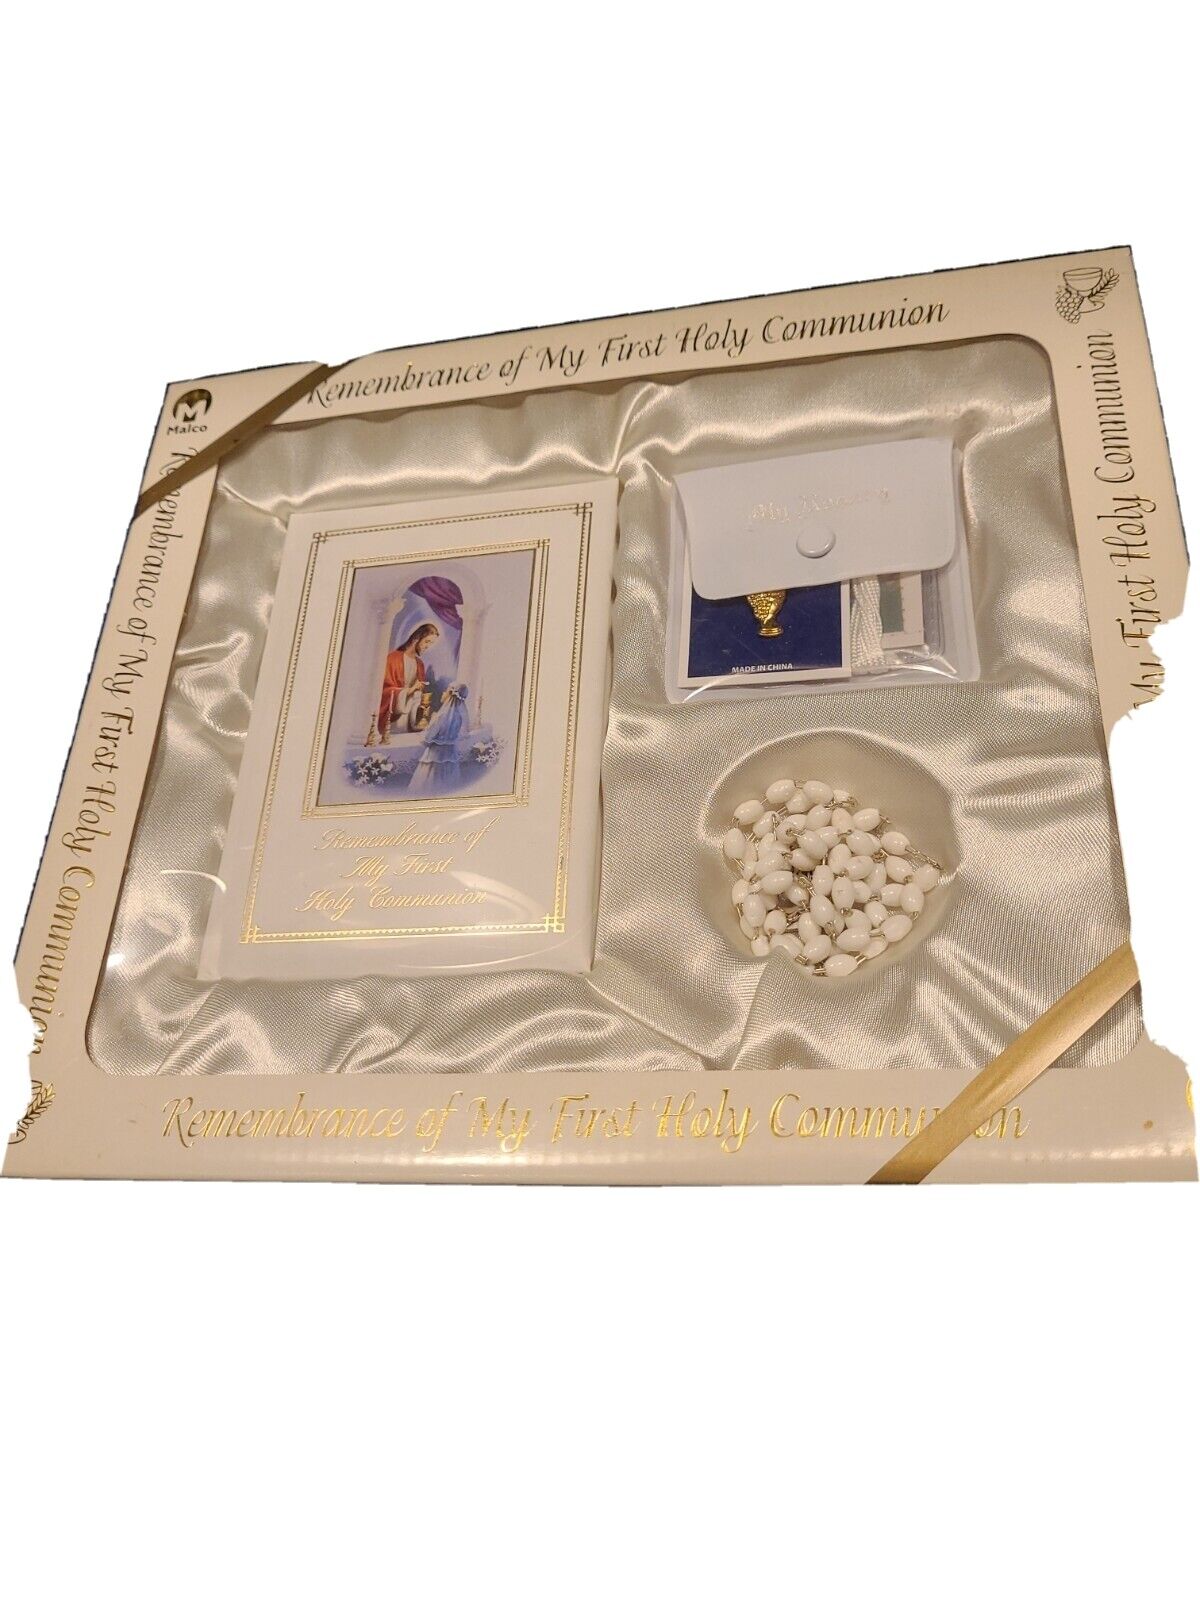 New Malco Remembrance Of My First Holy Communion Catholic Christian Gift Set